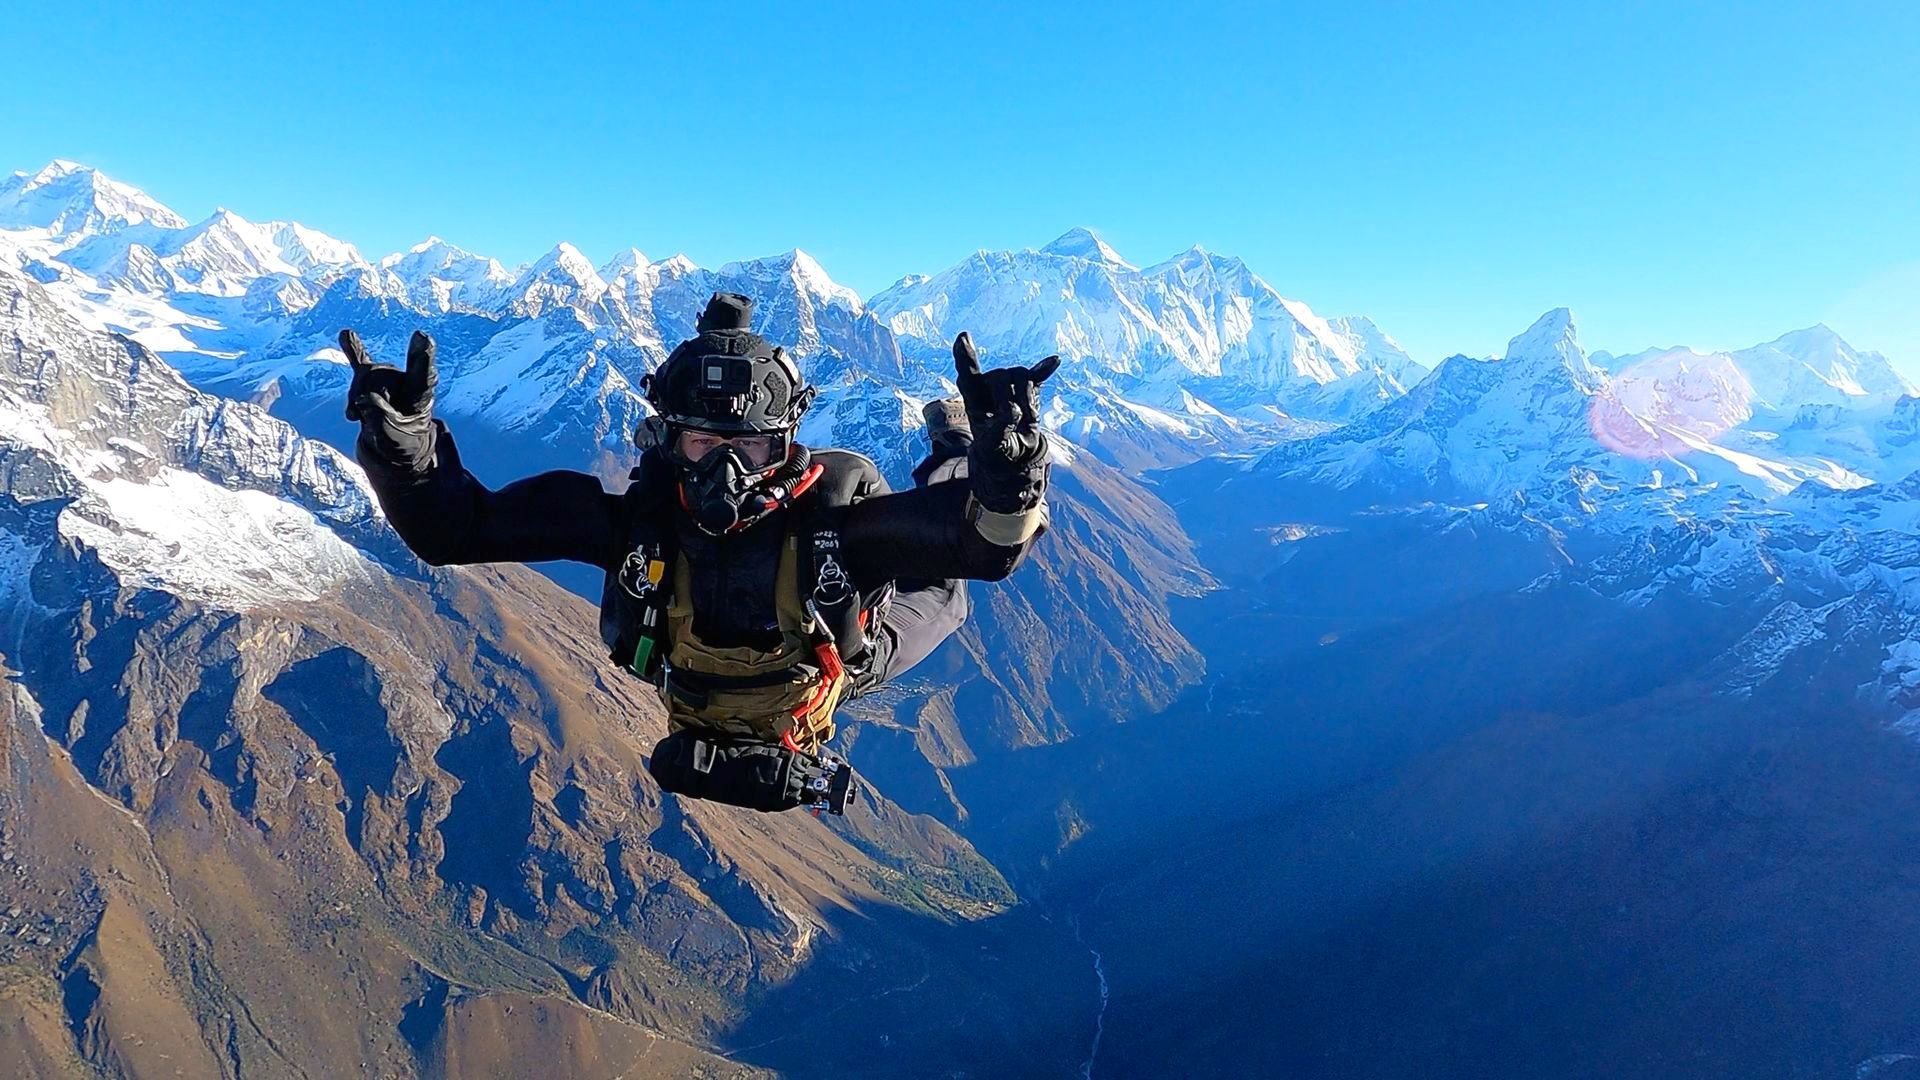 
Fastest Time To Skydive Six Continents: Legacy Expeditions Skydiving Team sets world record